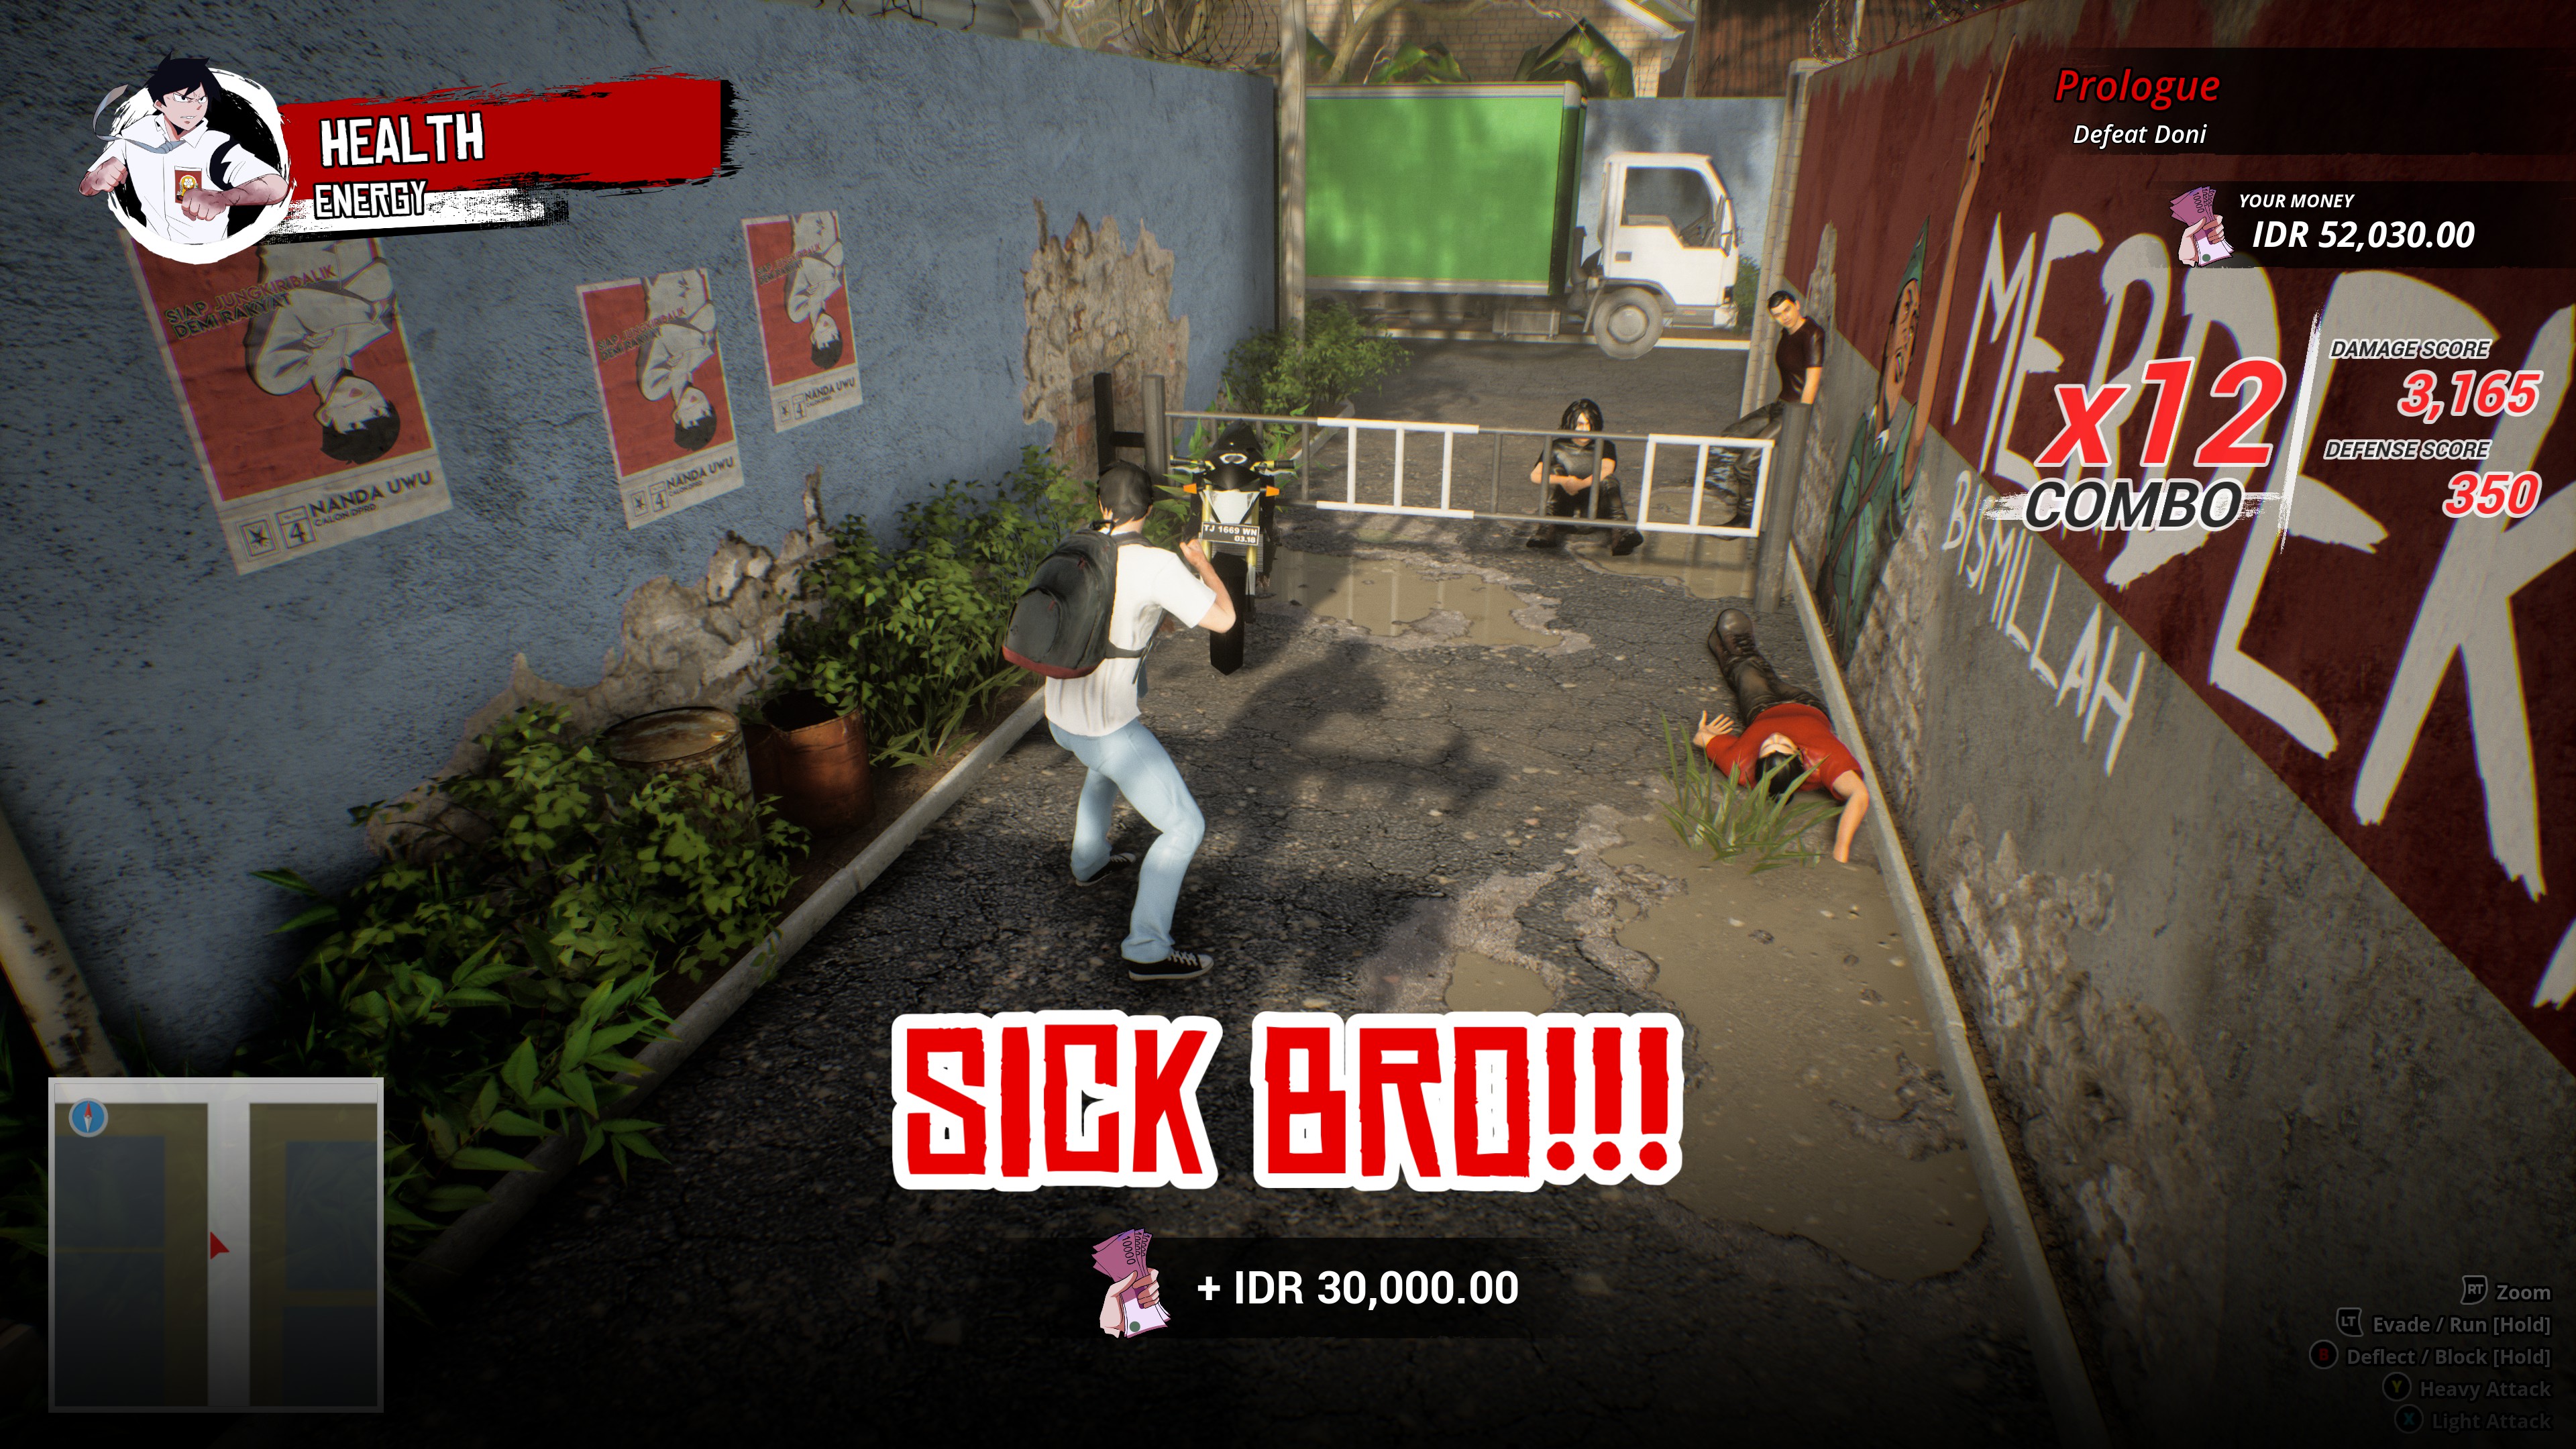 A fight scene from Troublemaker, showing a combo counter and a message reading 